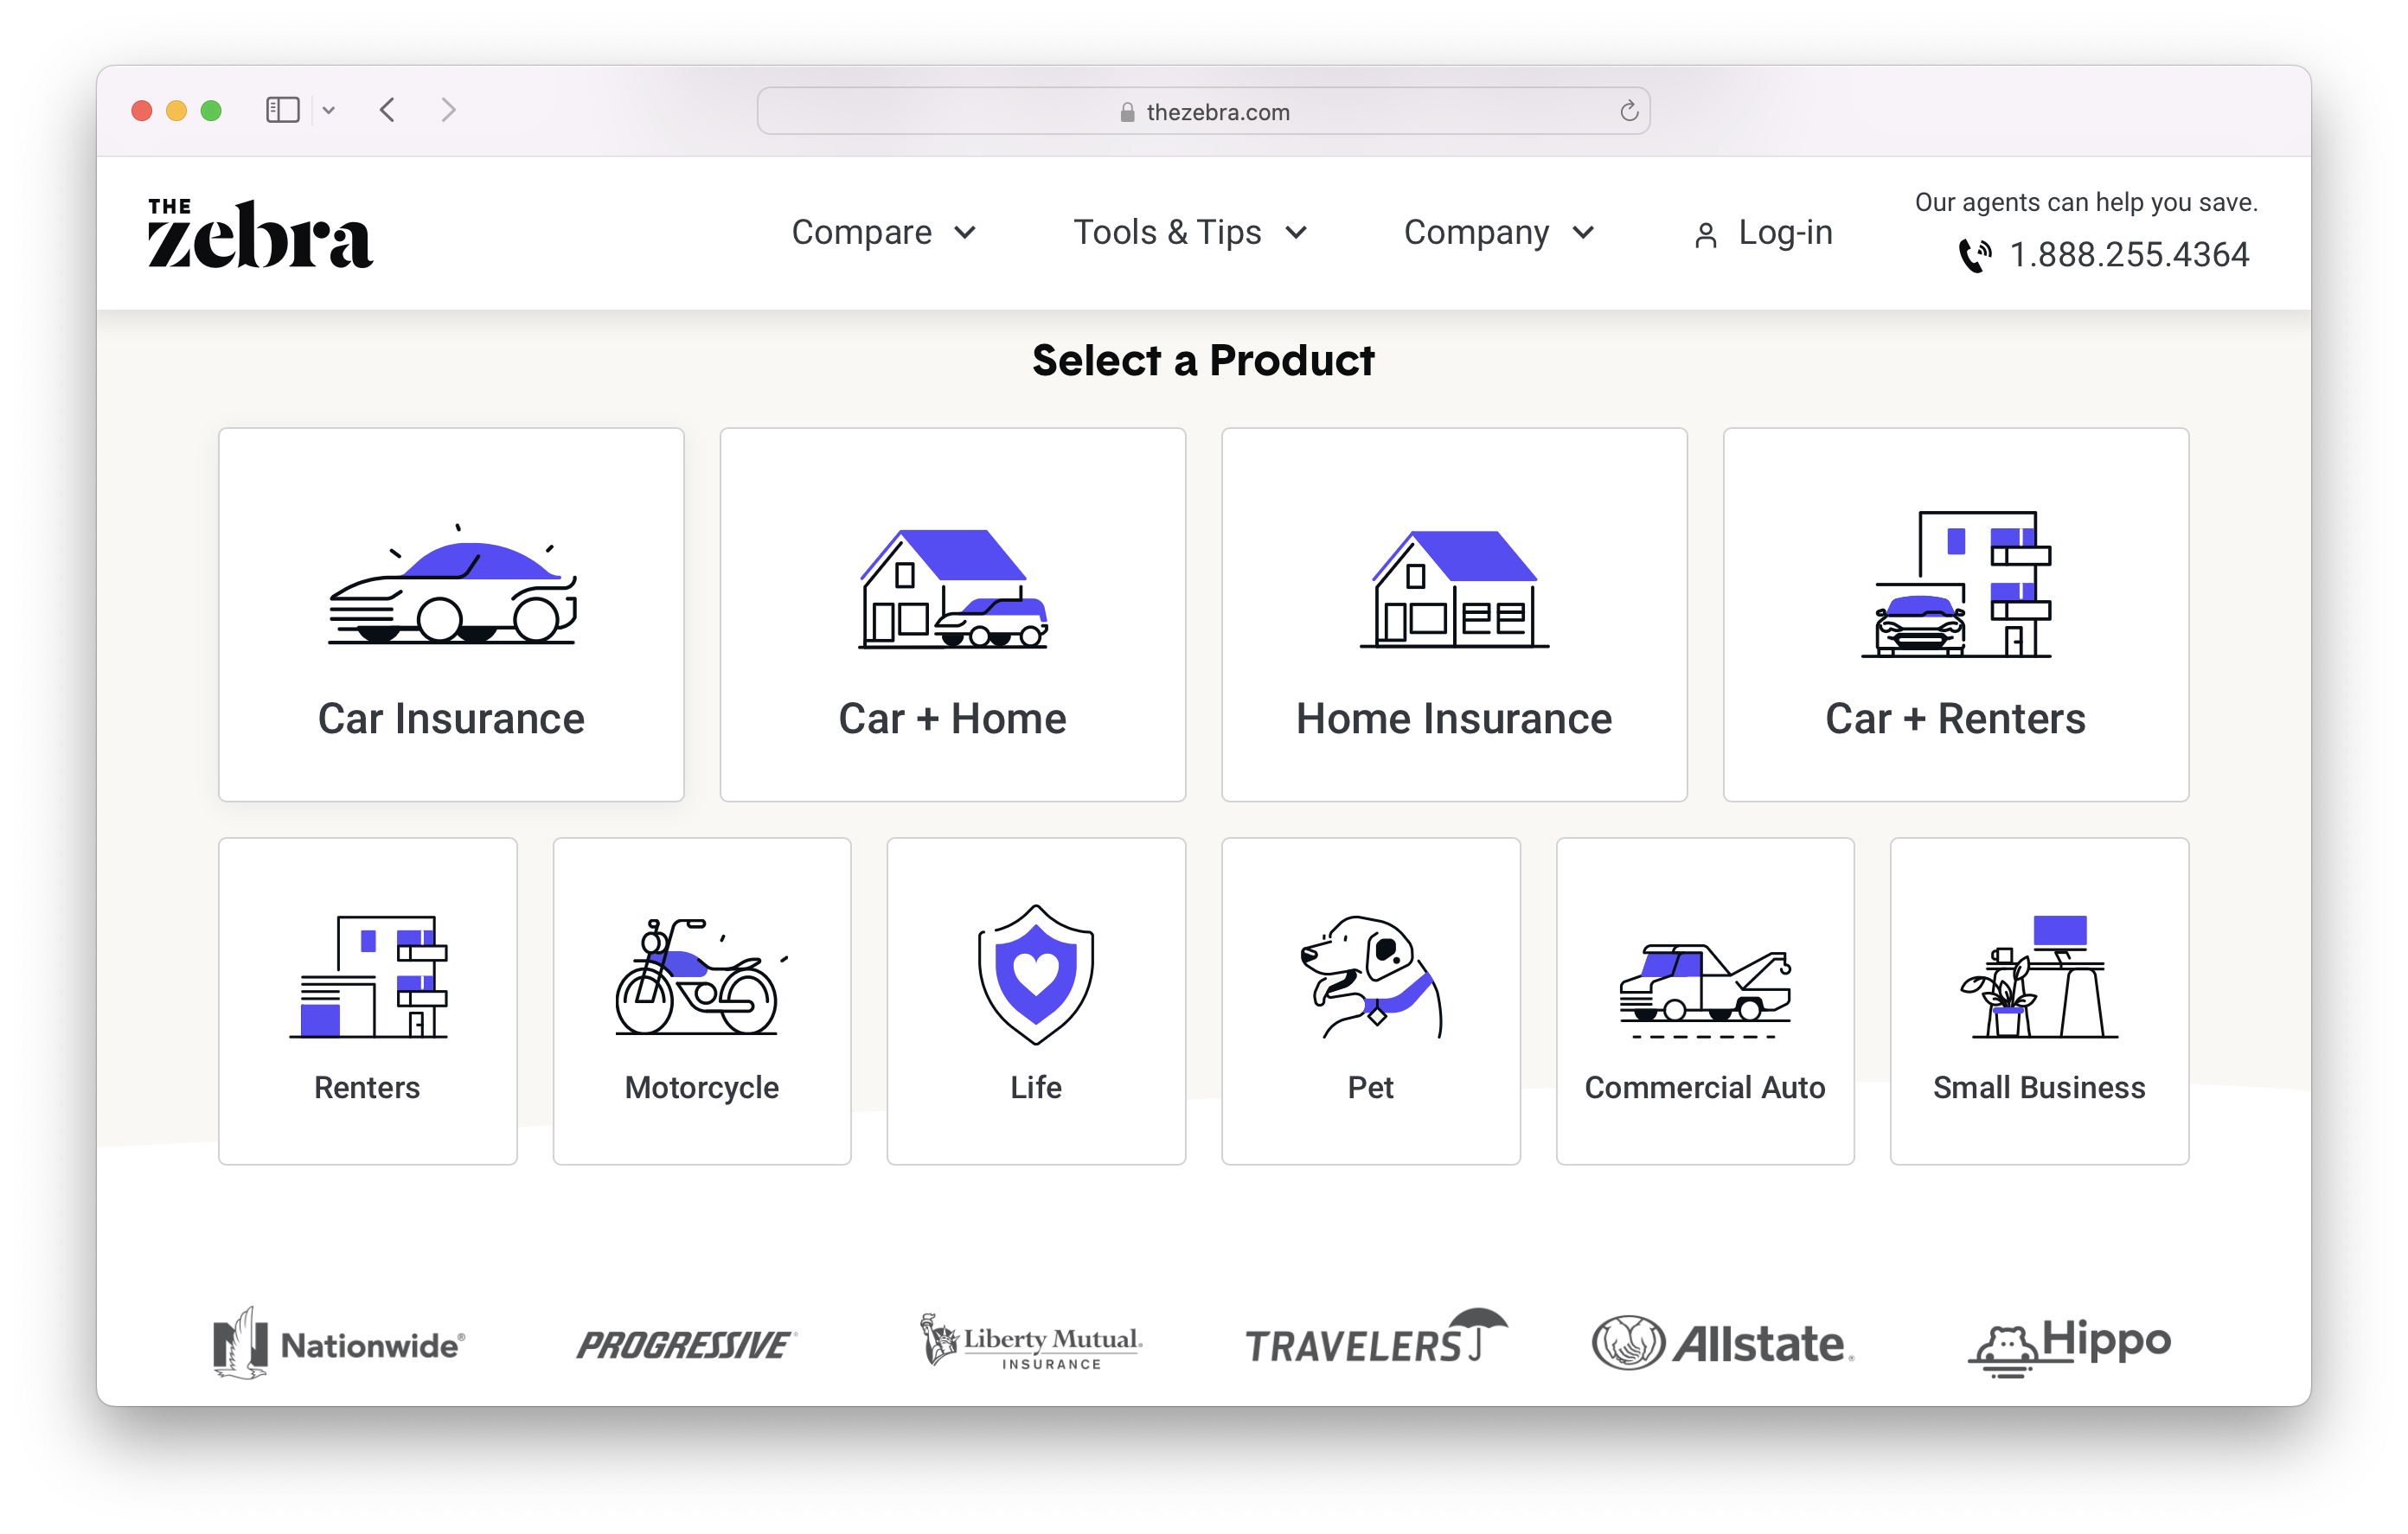 Insurance agencies included on The Zebra platform, as listed on their homepage.